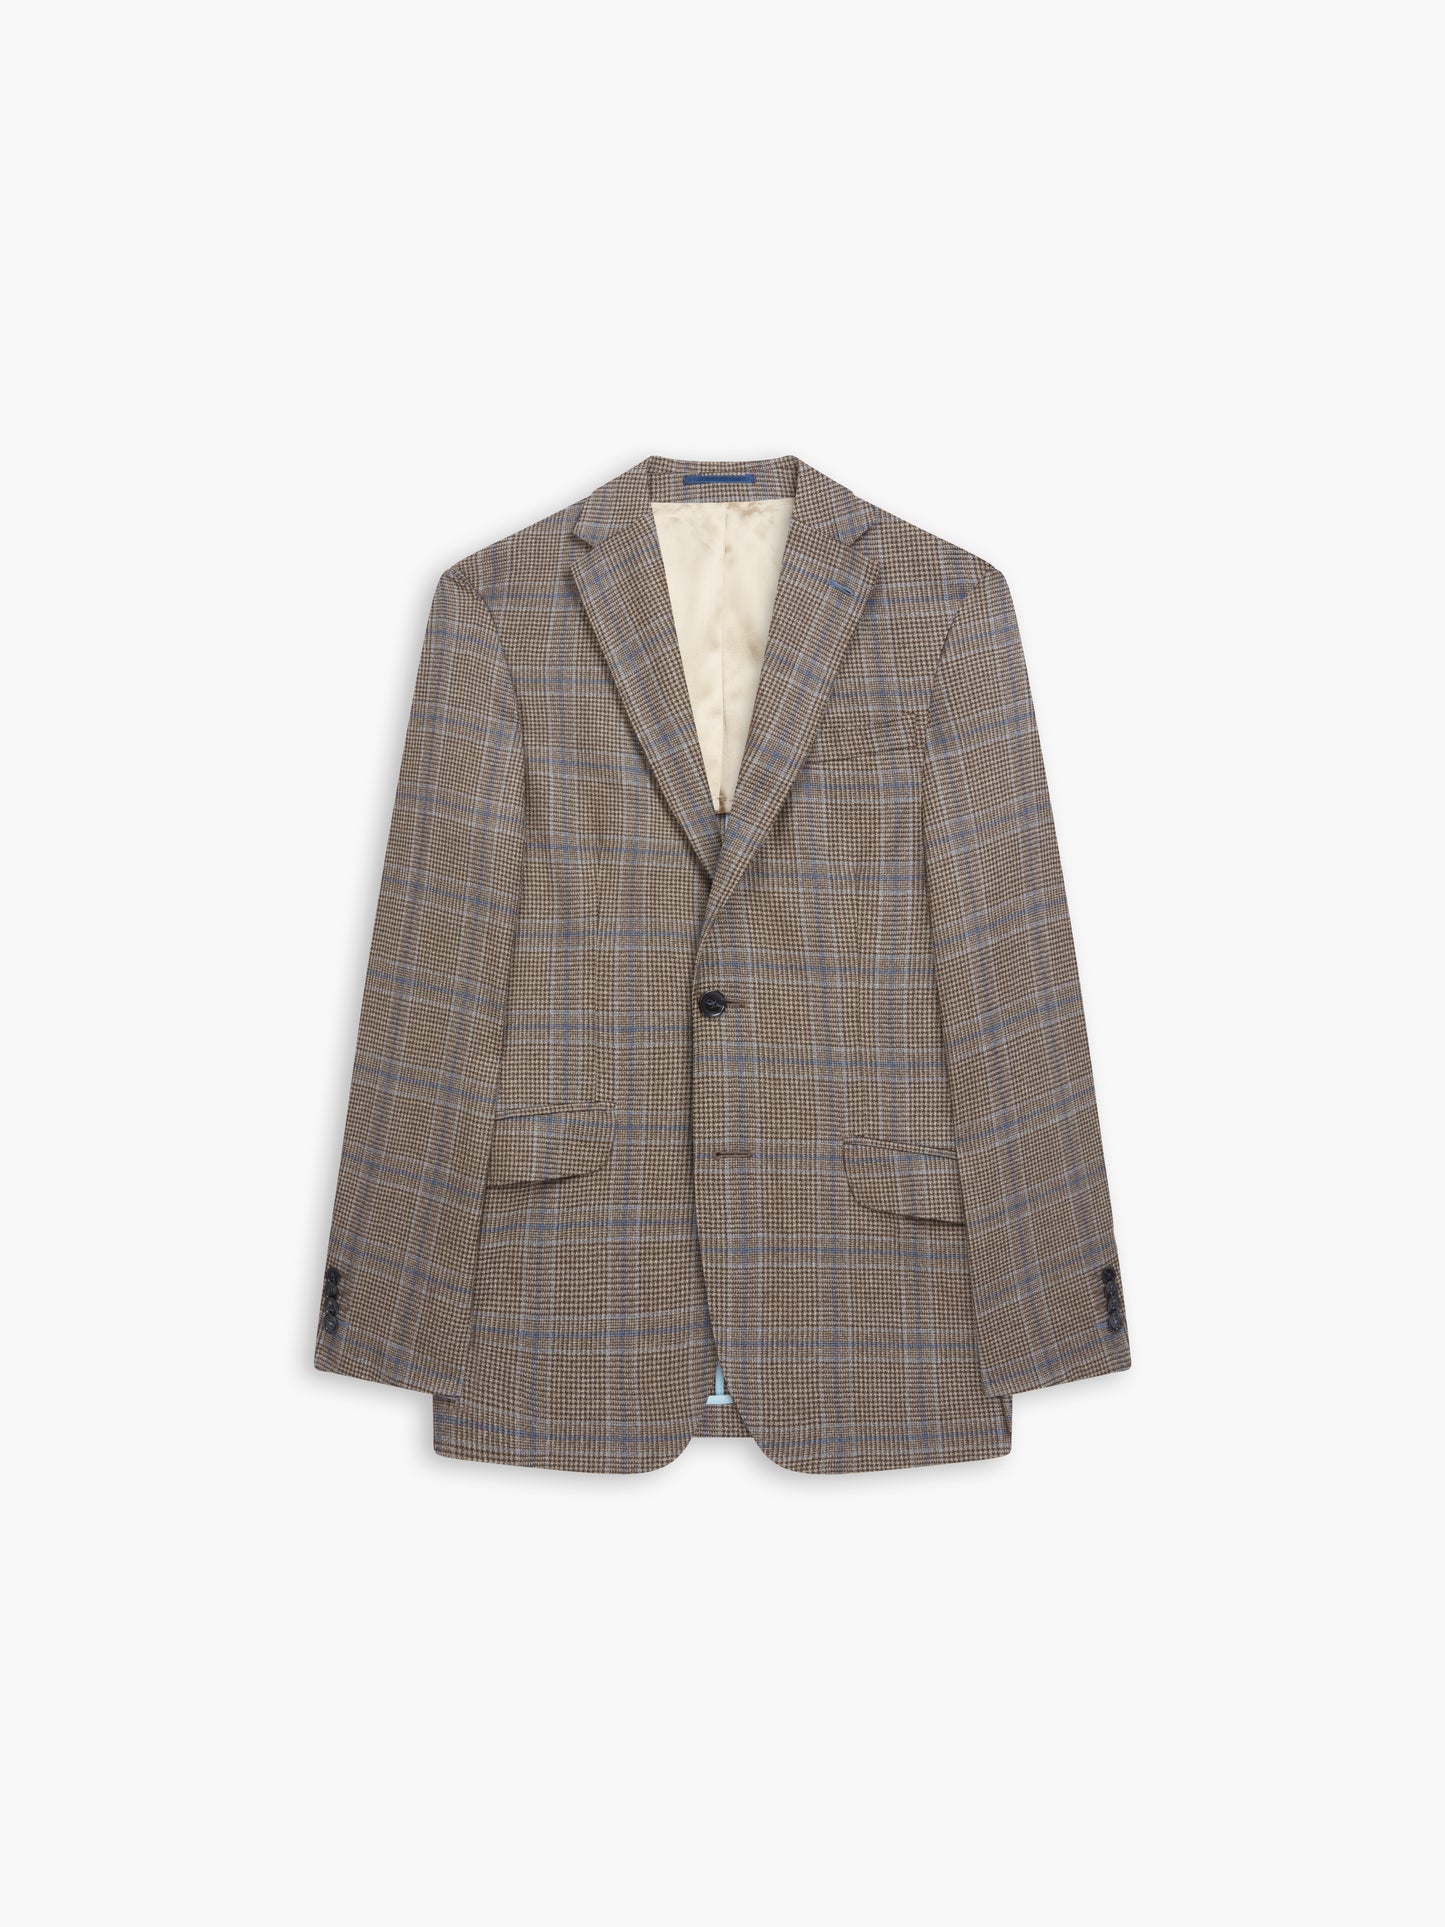 Maiden Slim Fit Blue And Brown Glencheck Jacket